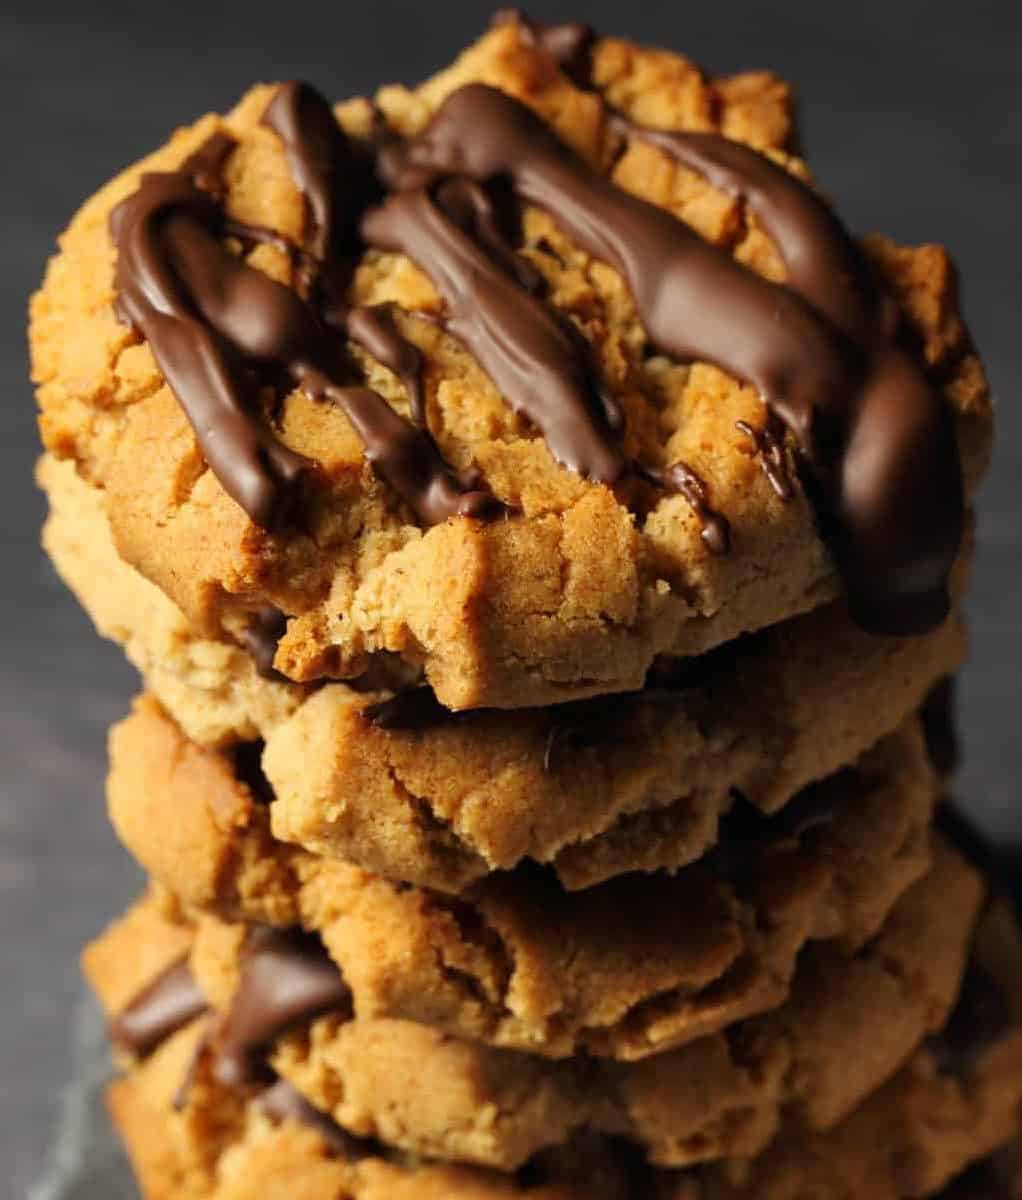  No animal products were used in the making of these deliciously satisfying cookies.